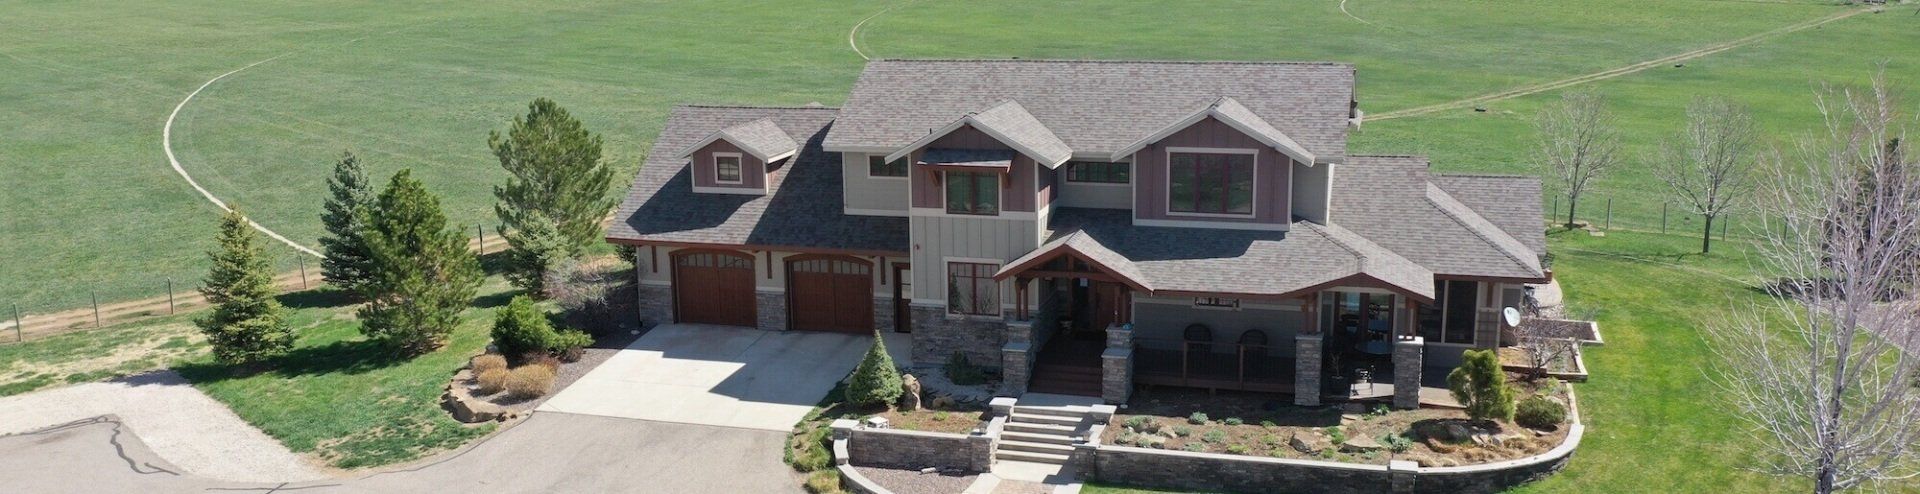 Total new roof replacement Fort Collins CO